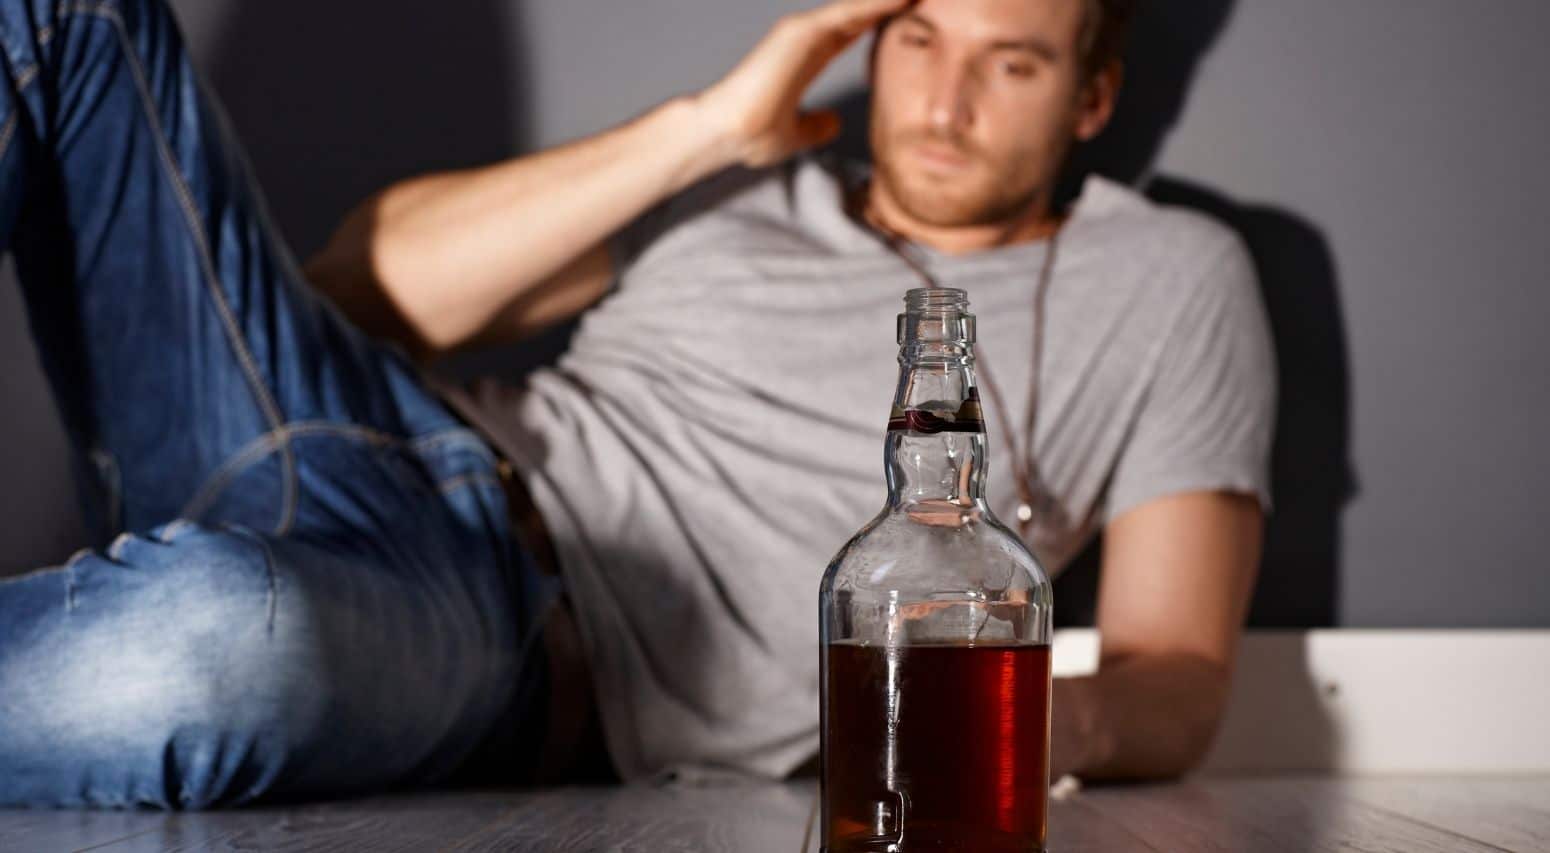 Is My Addiction Bad Enough? How to Know if You’ve Hit Rock Bottom